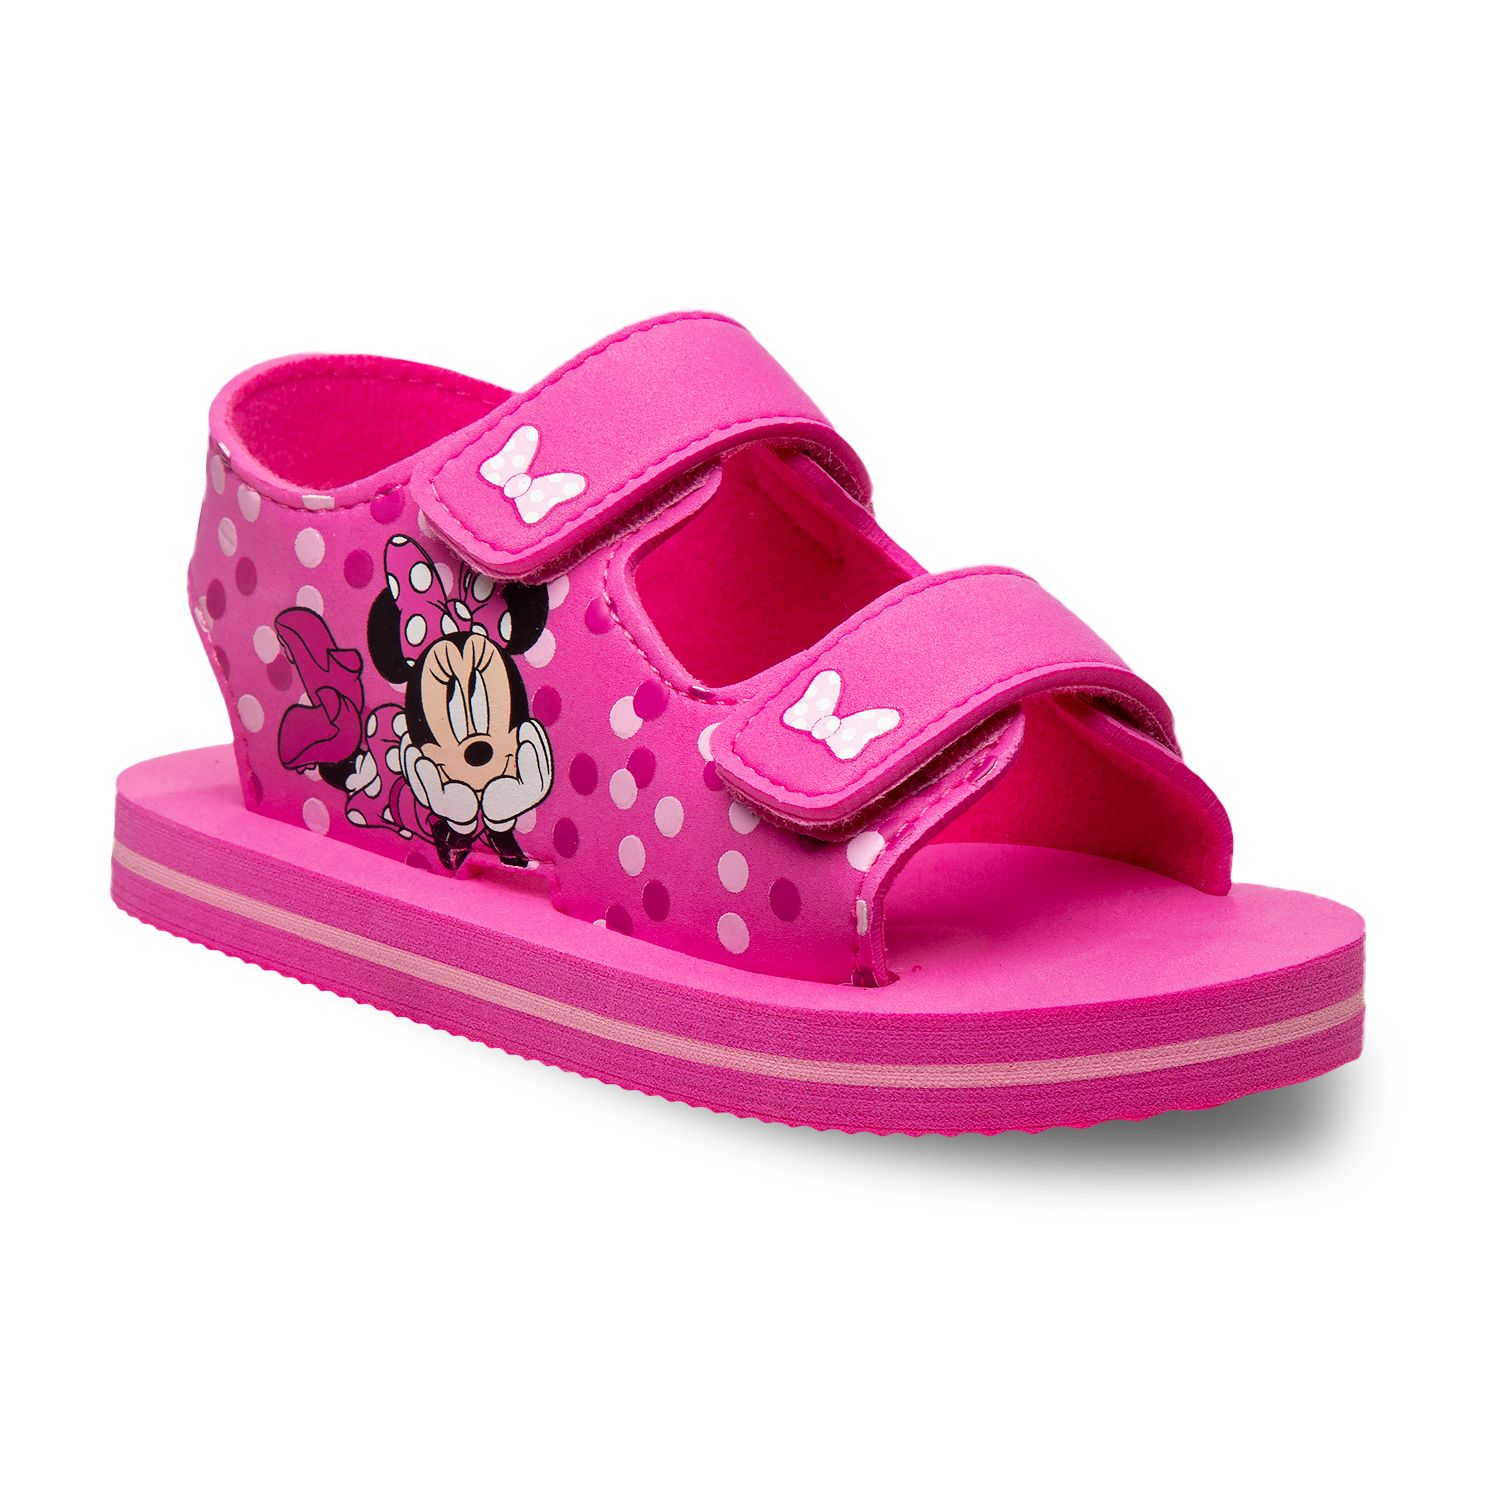 Image for Disney 's Minnie Mouse Toddler Girls' Sandals at Kohl's.